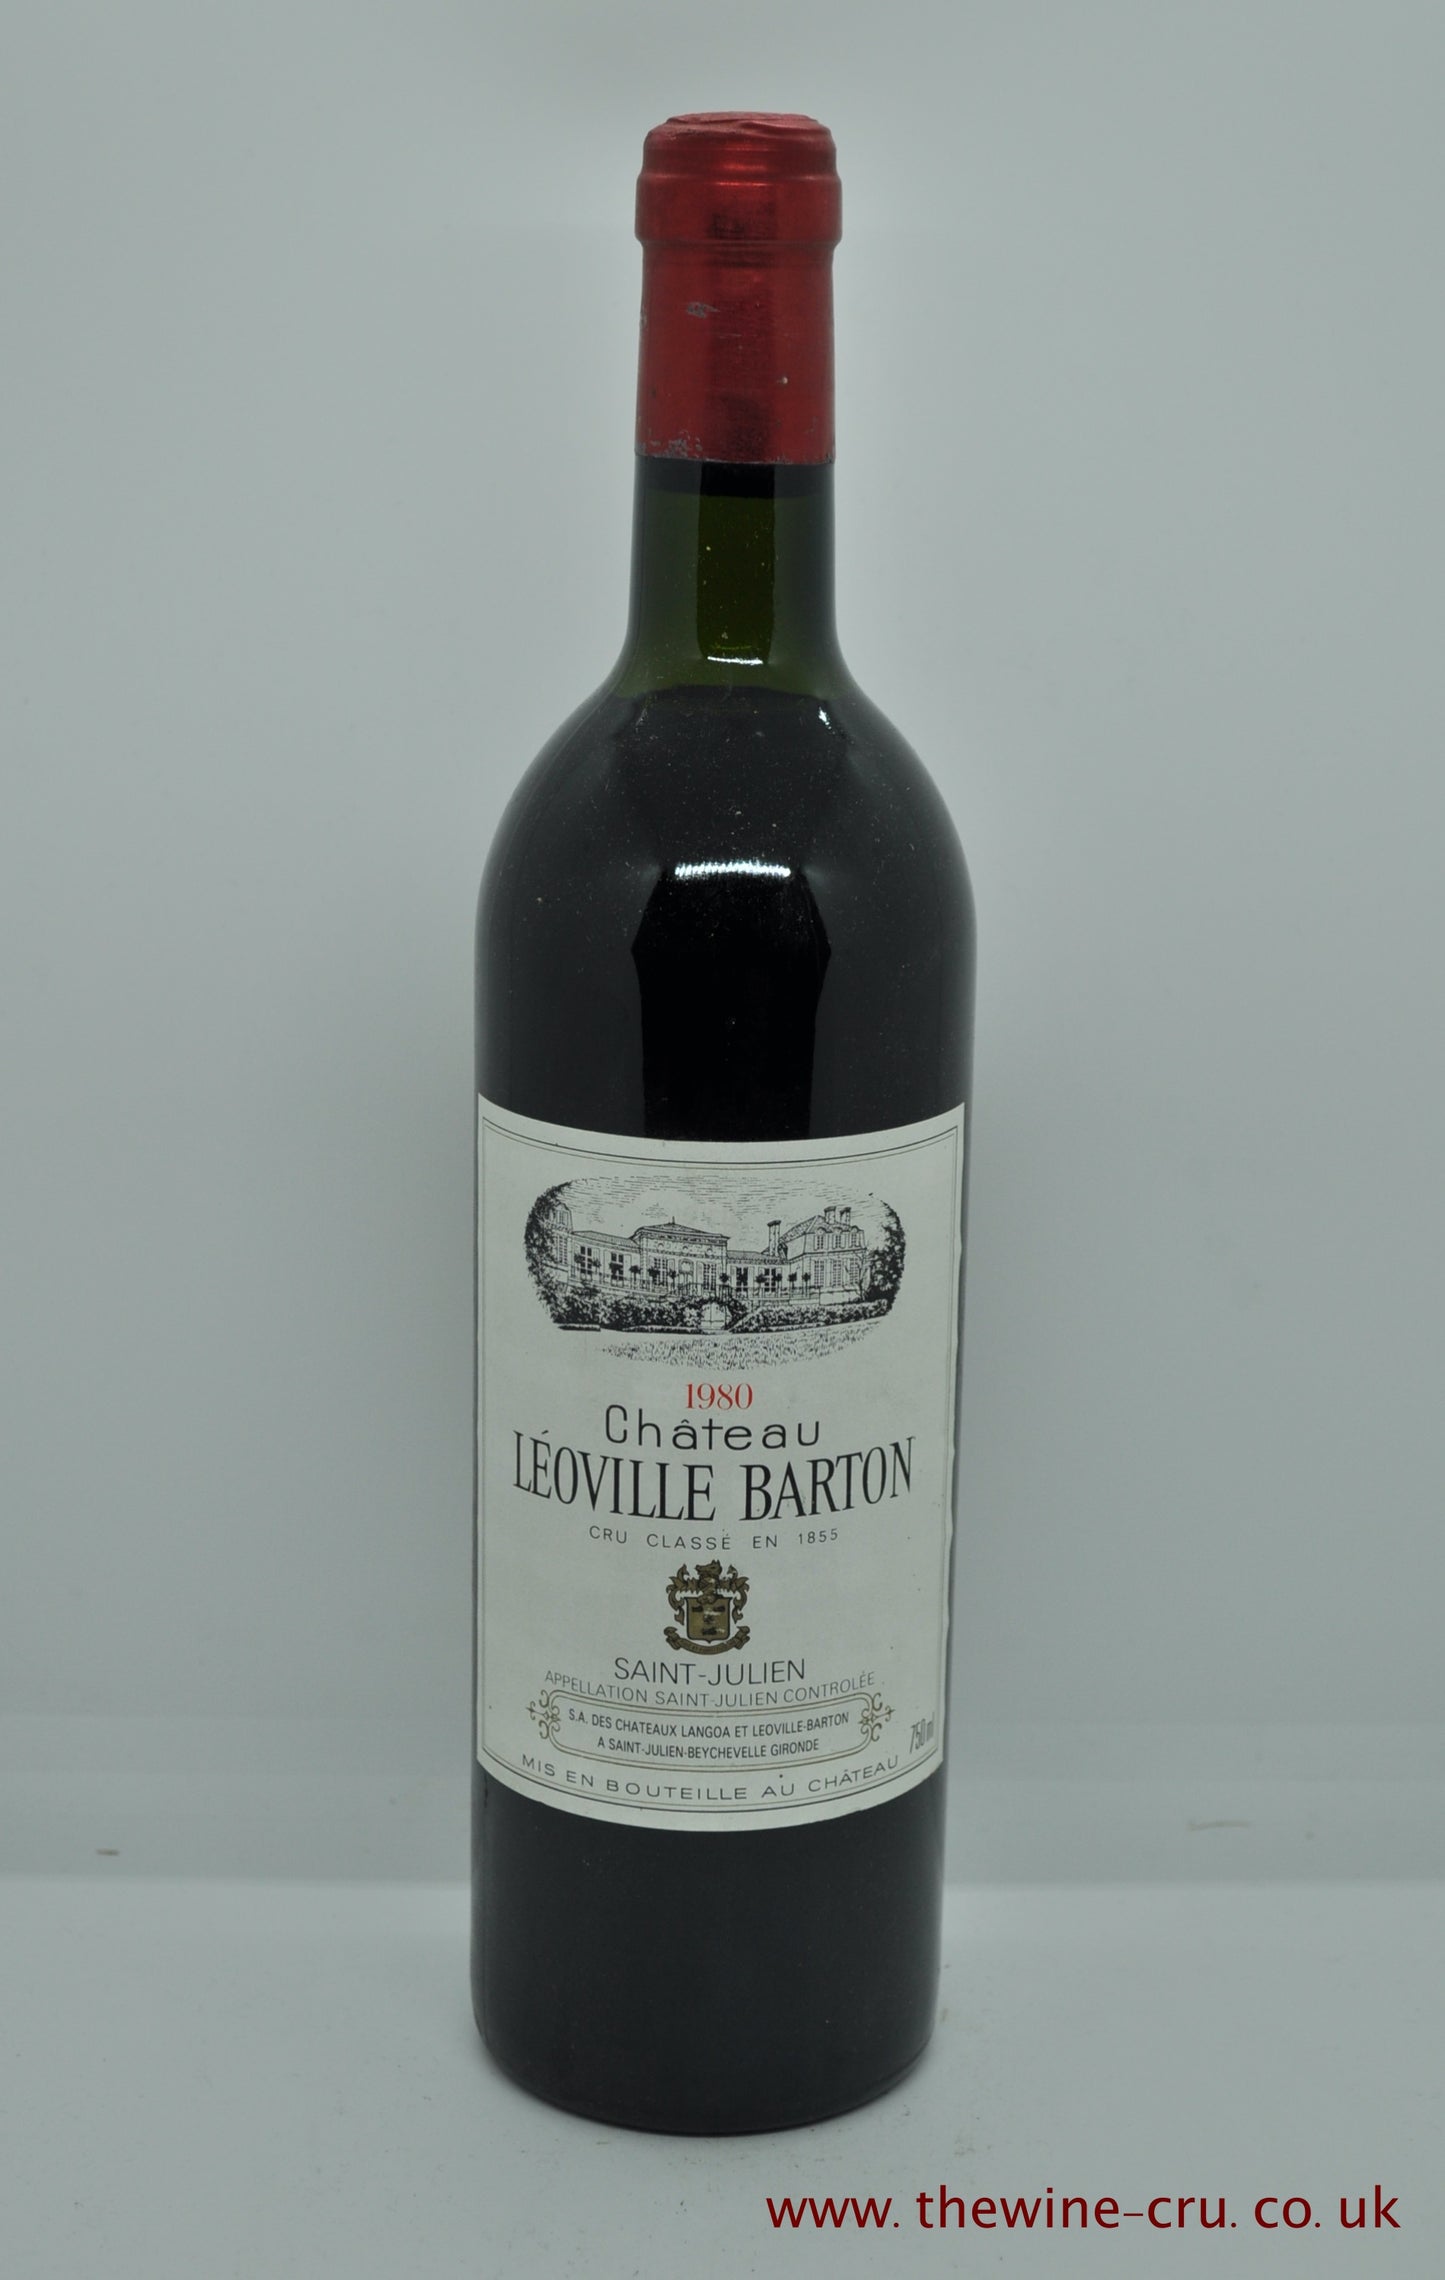 1980 vintage red wine. Chateau Leoville Barton, Bordeaux, France. The bottle is in good condition with the wine level being top shoulder. Immediate delivery. Free local delivery. Gift wrapping available.